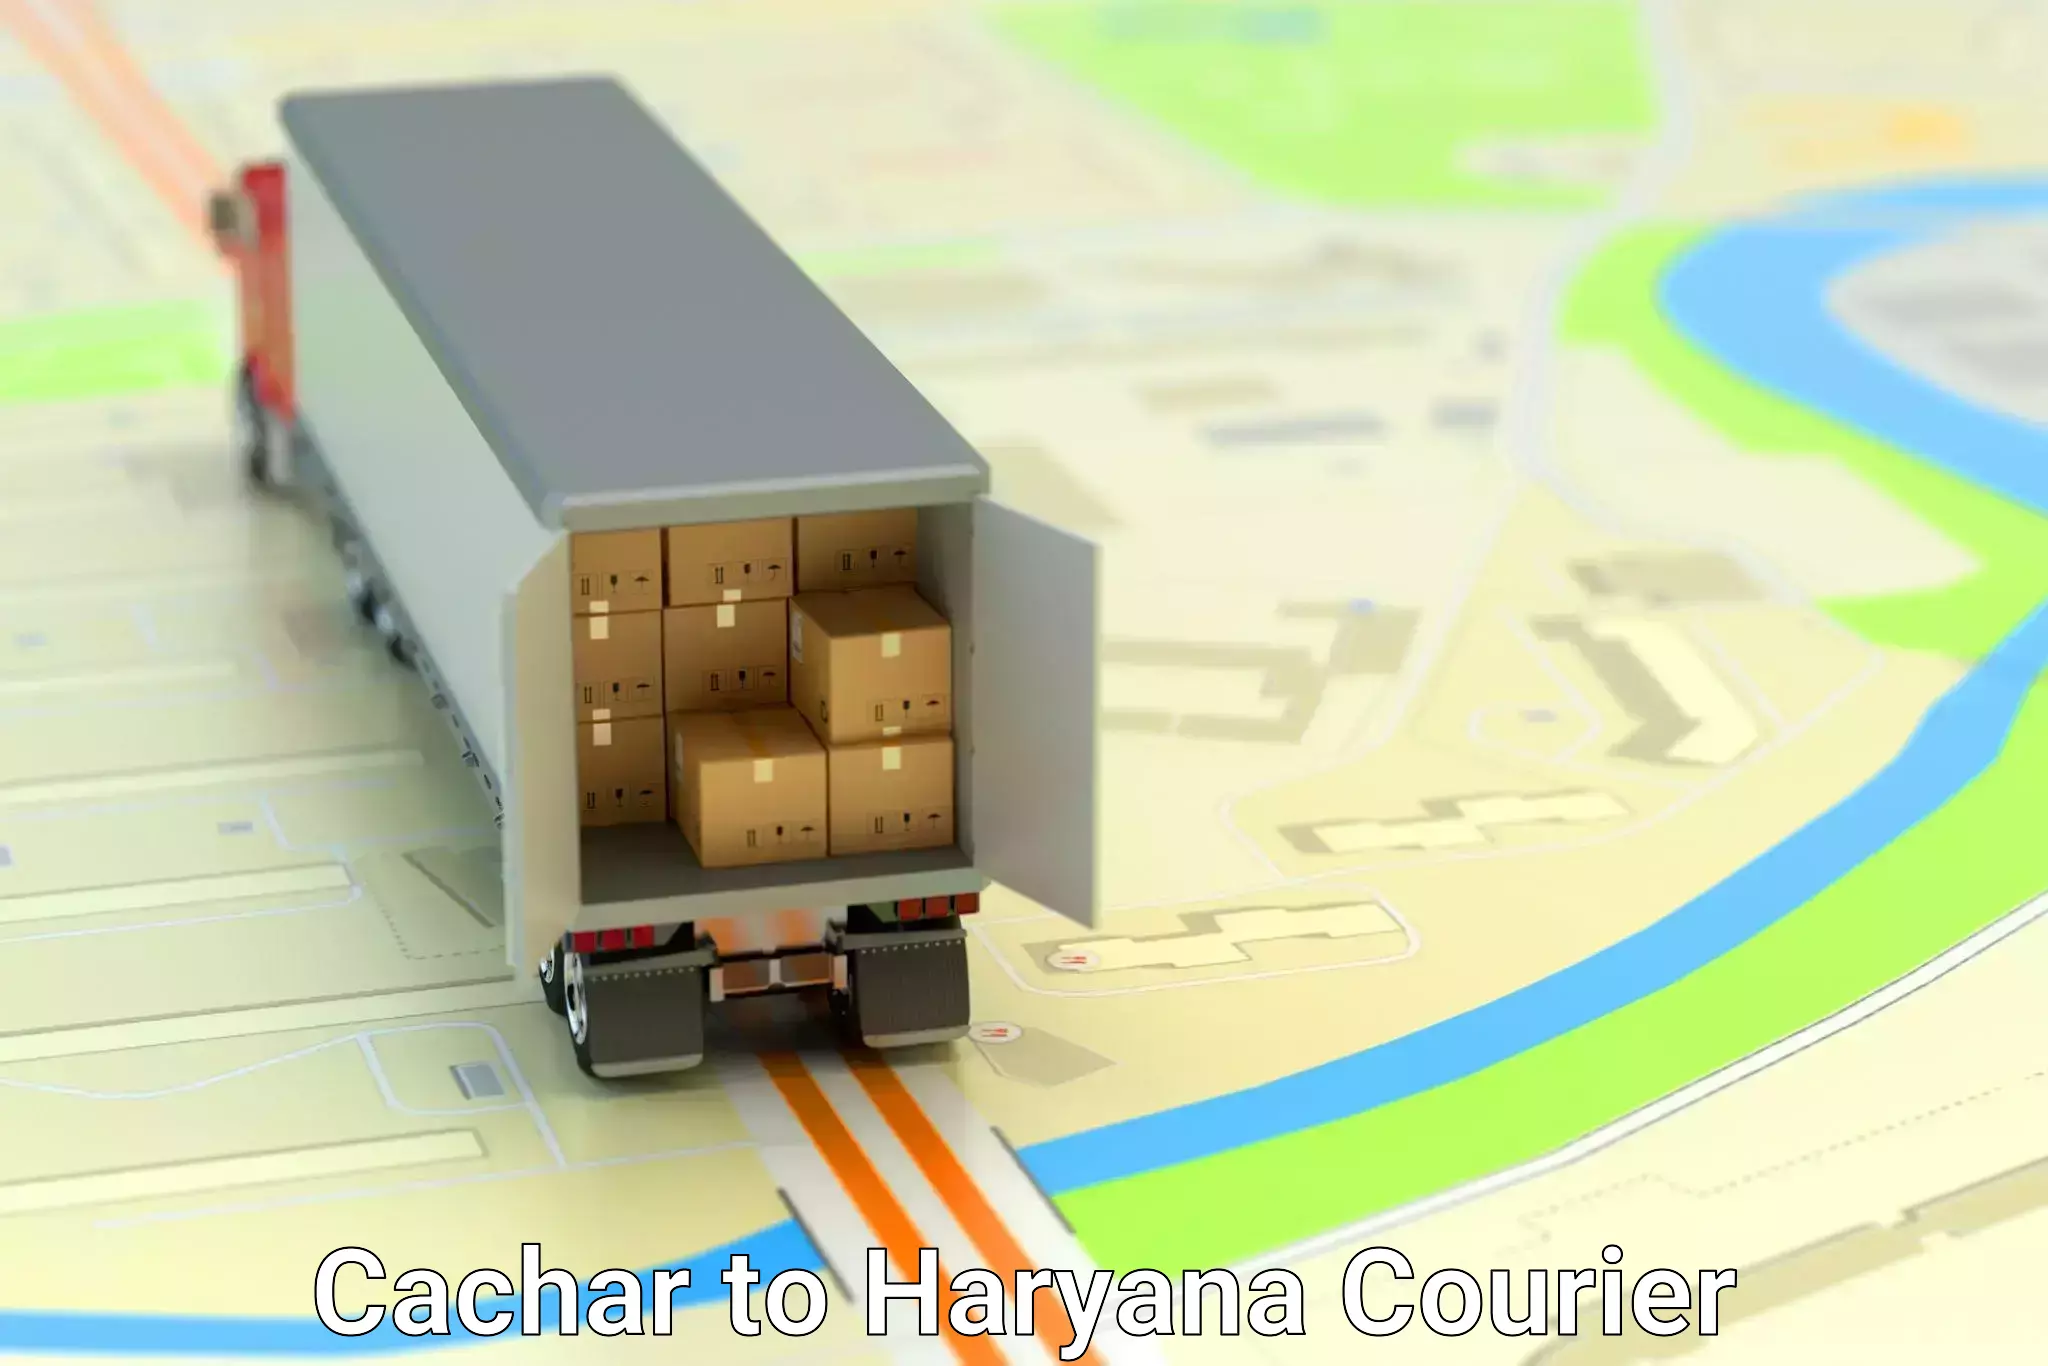 Special handling courier Cachar to Gurgaon